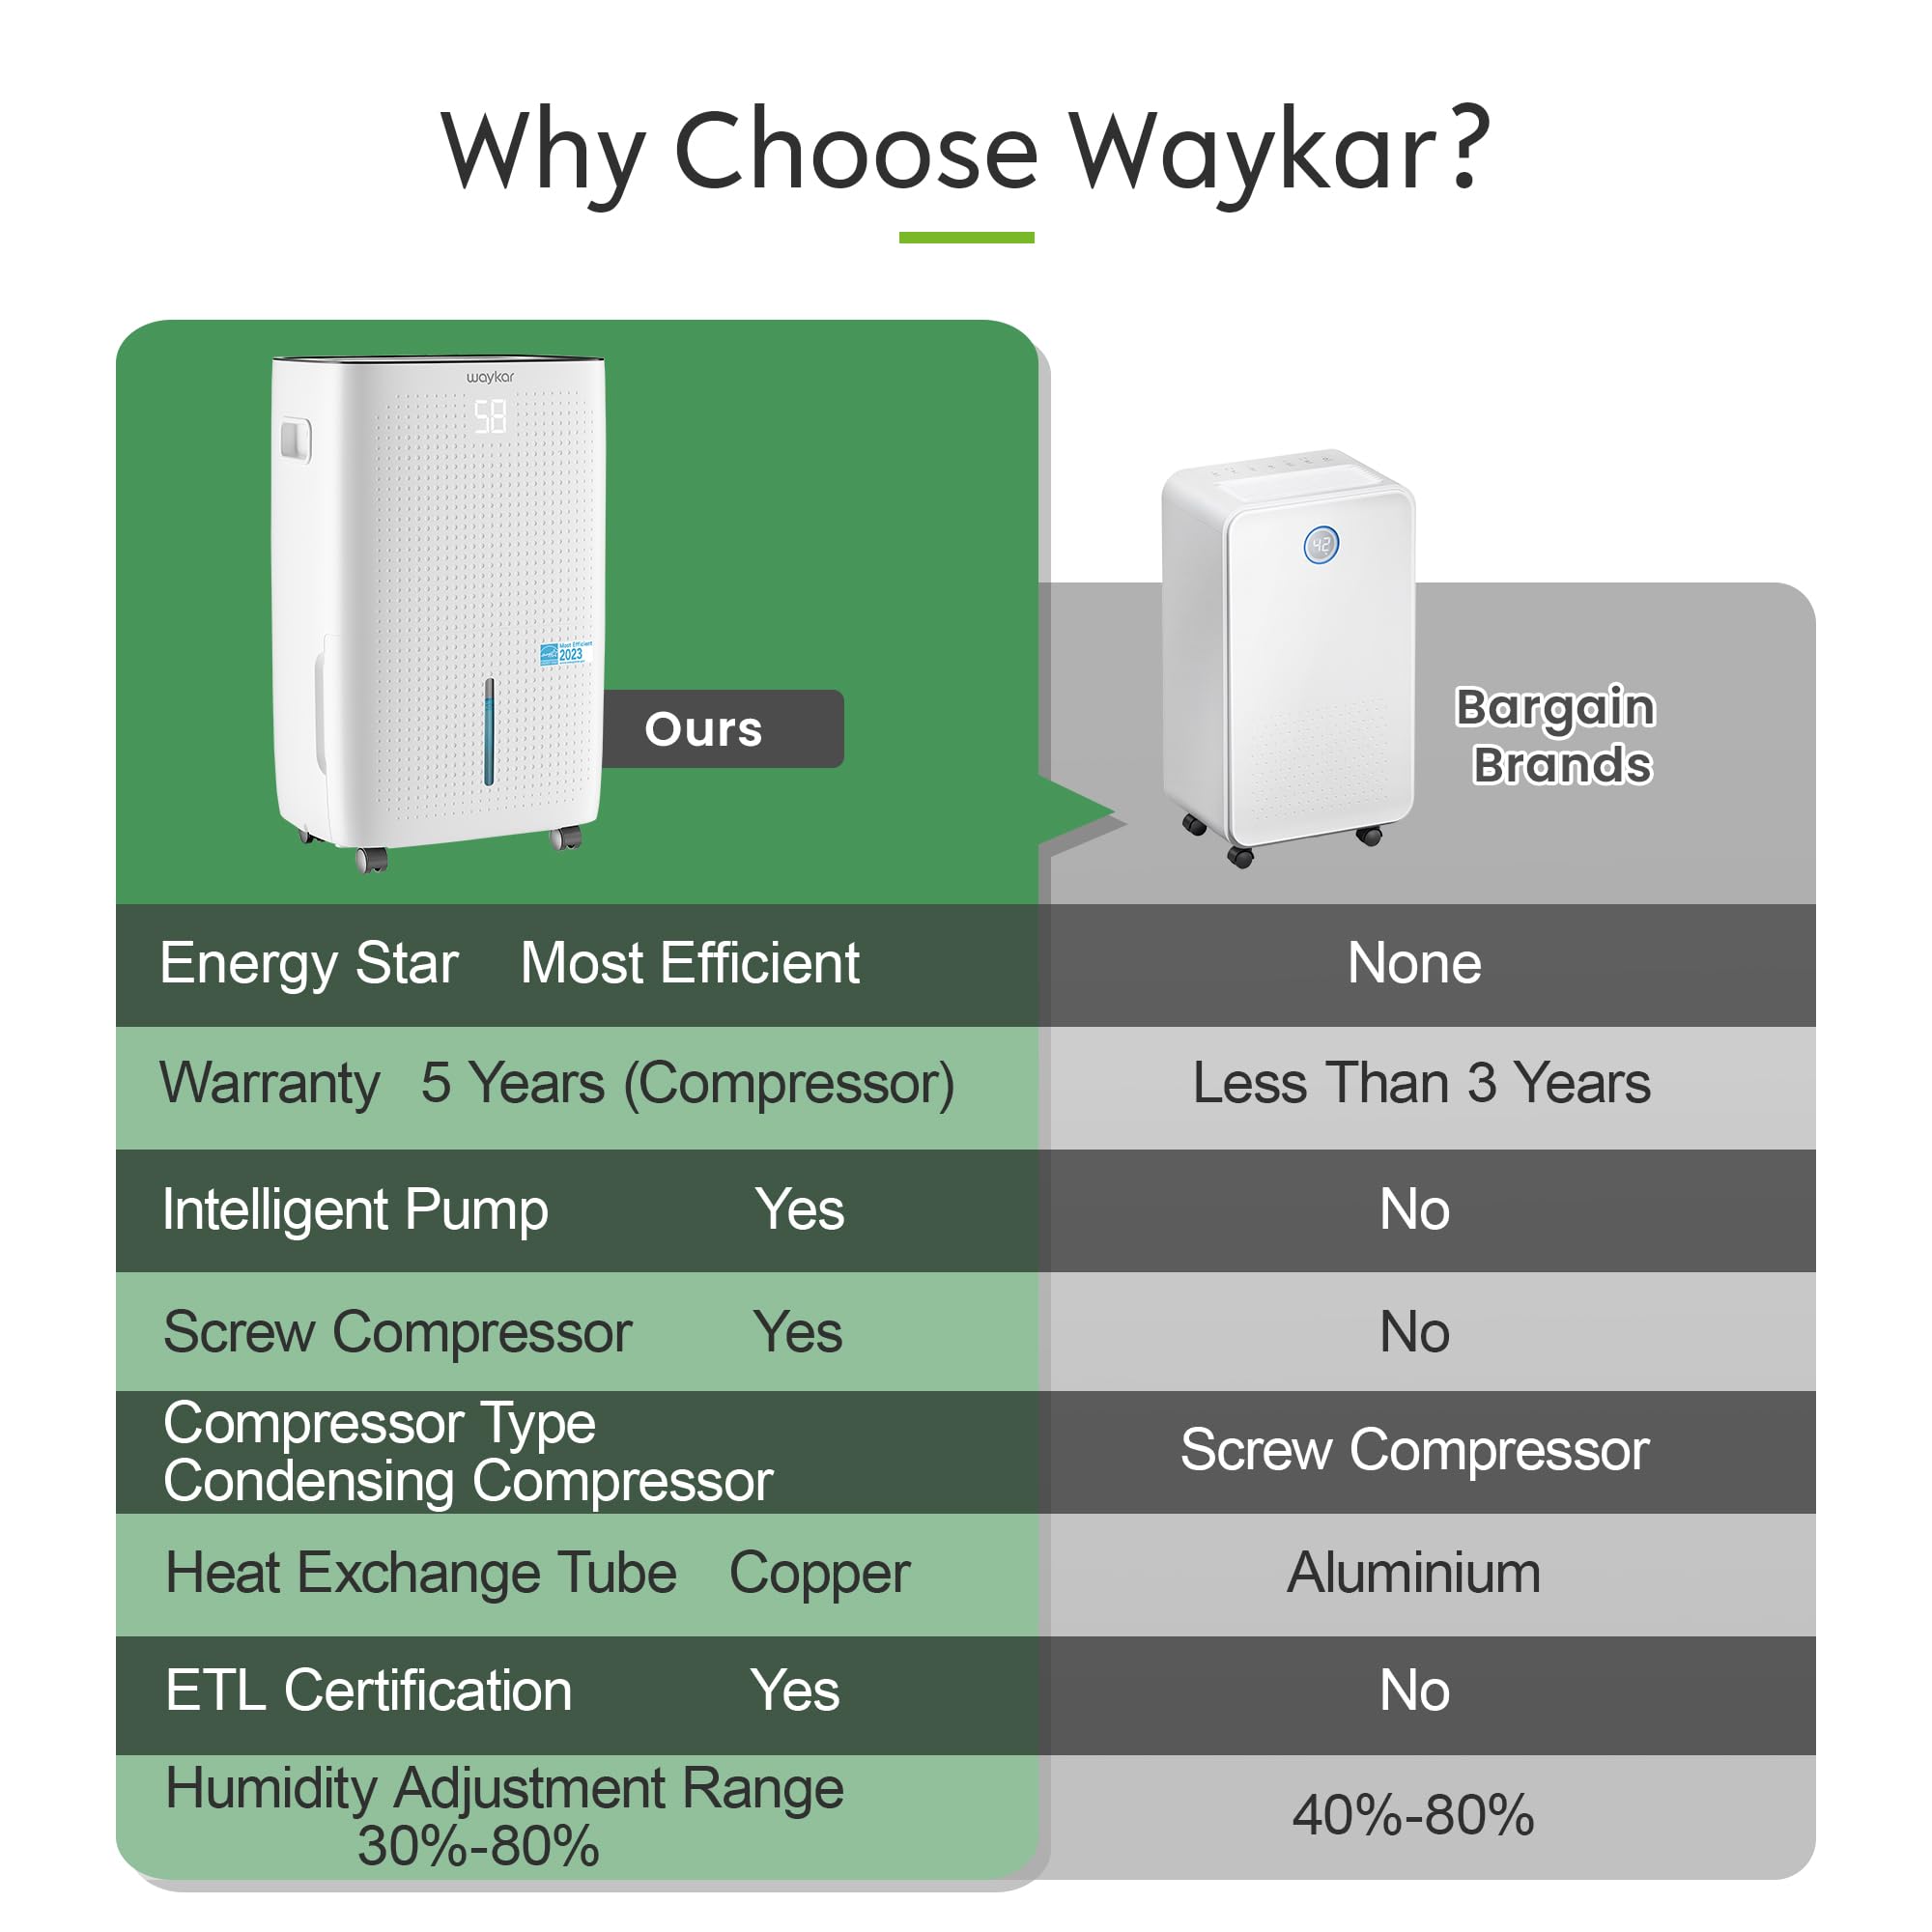 Waykar 150 Pints 7,000 Sq. Ft Energy Star Dehumidifier with Pump for Commercial and Industrial Large Room, Warehouse, Storage, Home, Basement with 1.85 Gal Water Tank and Drain Hose